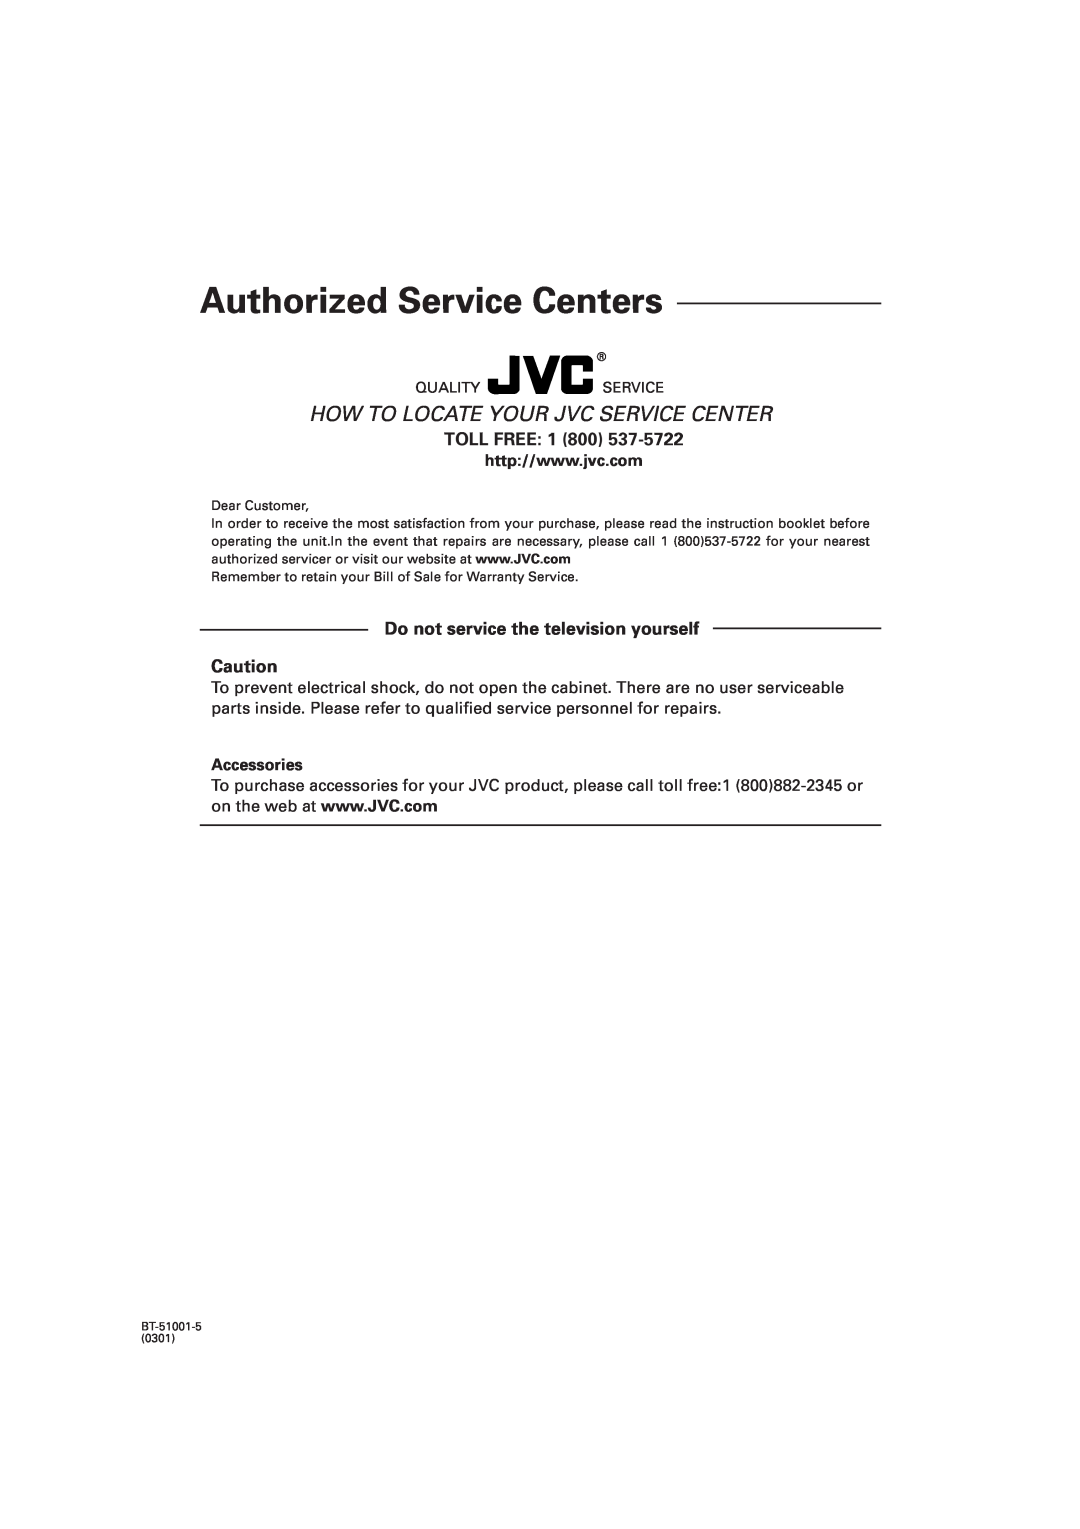 JVC HX-Z1 manual Toll Free, Do not service the television yourself, Authorized Service Centers, Accessories 